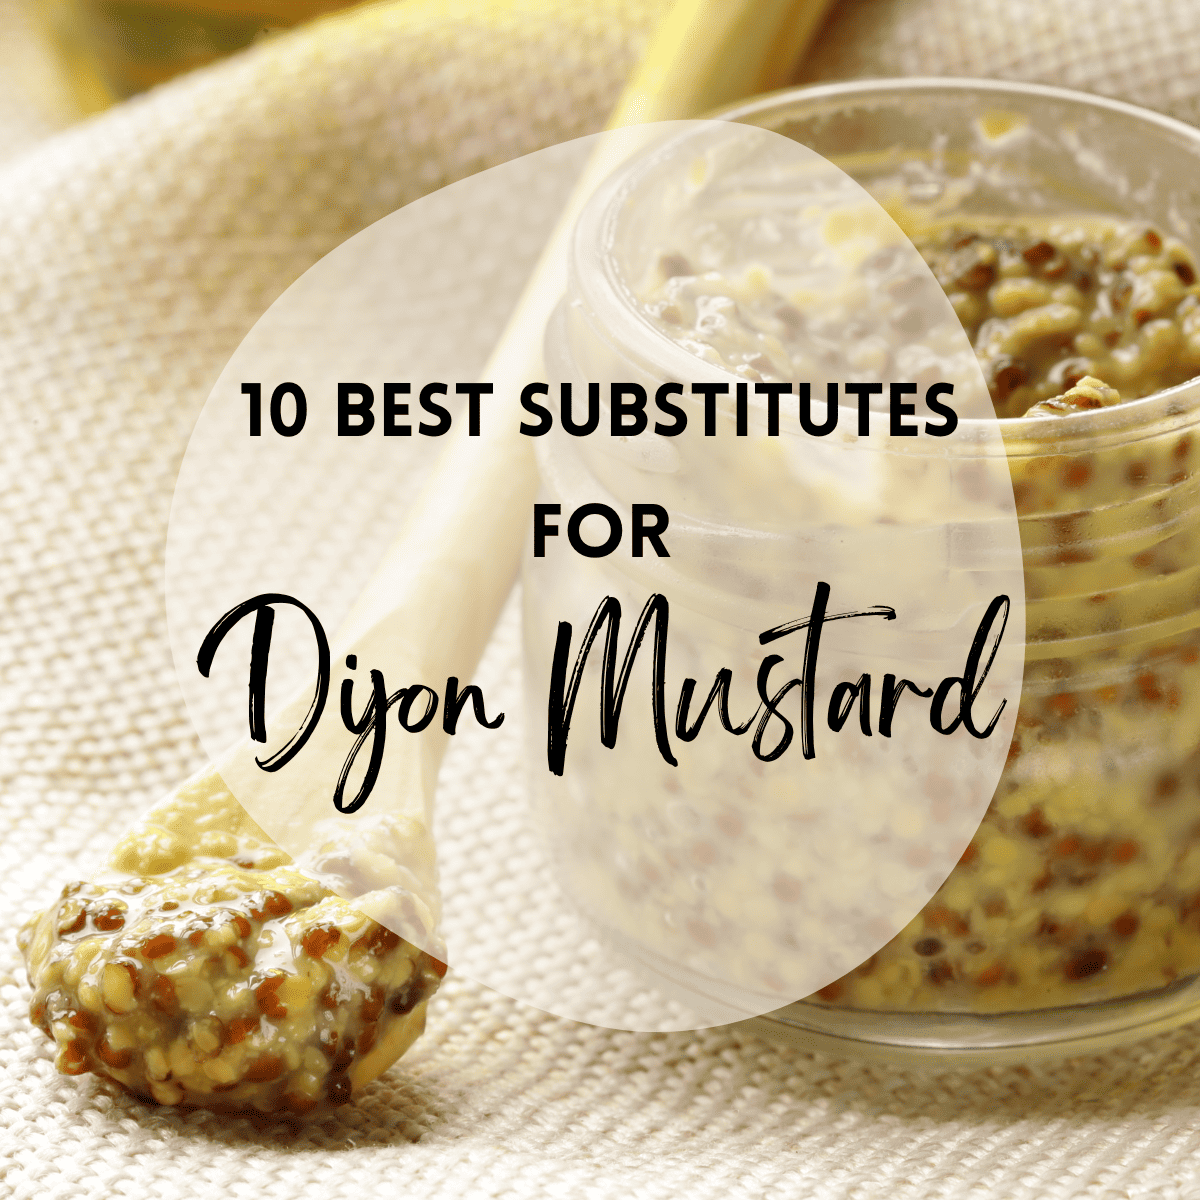 Image of dijon mustard with overlay text that says '10 best substitutes for dijon mustard'. 